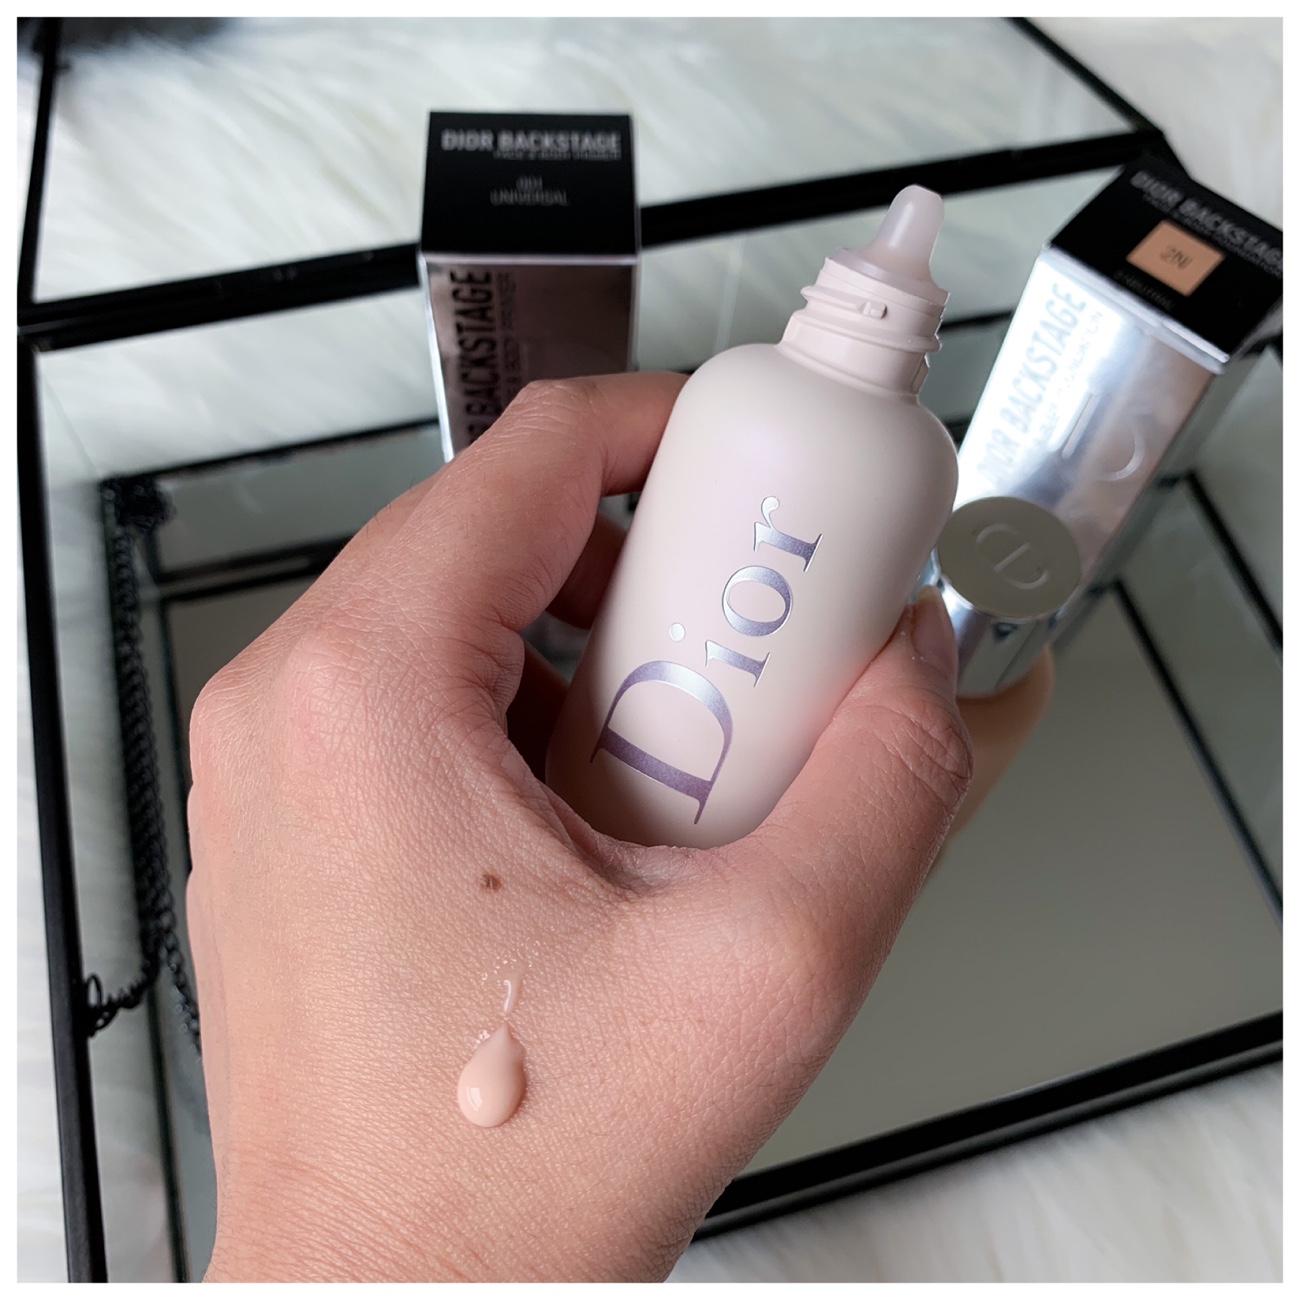 dior backstage primer face and body